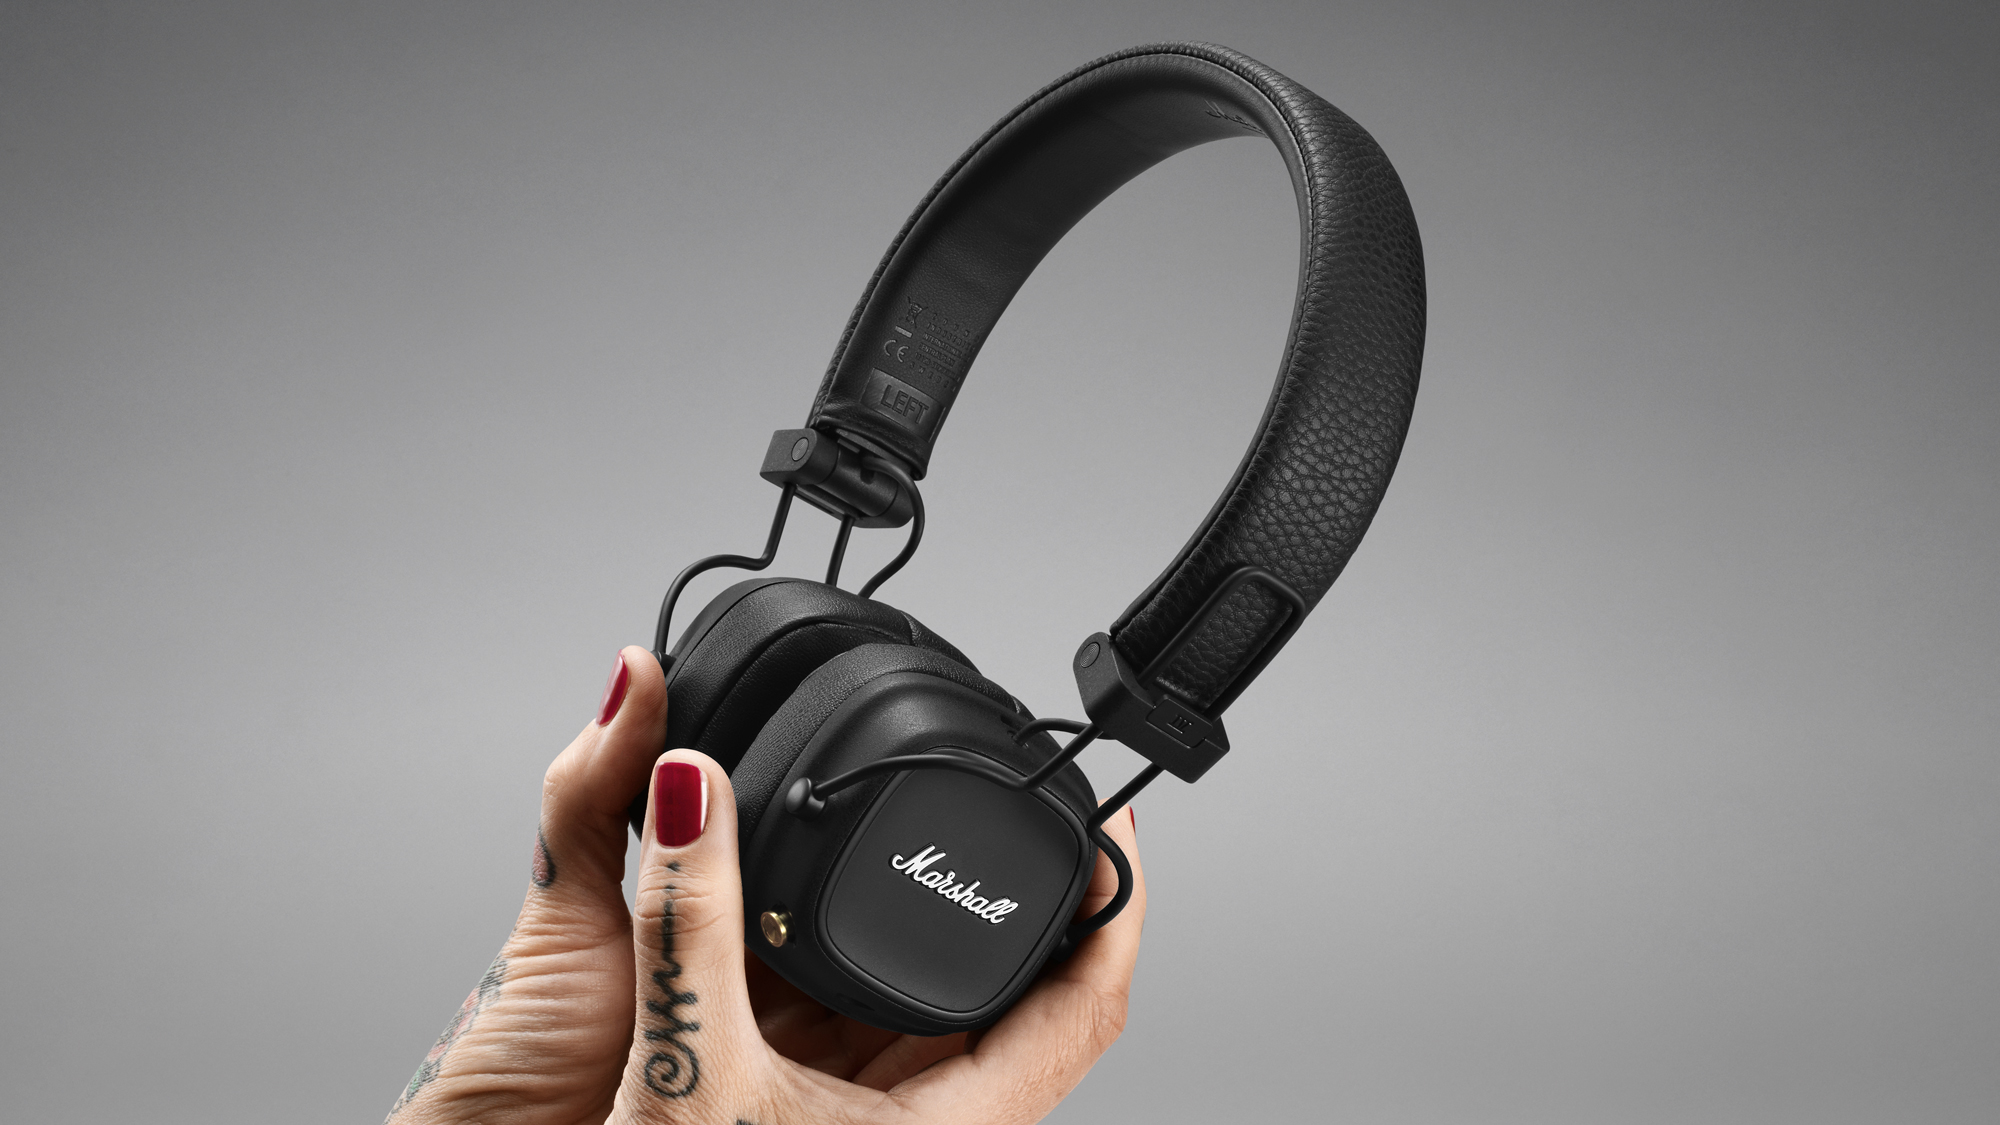 A lack of active noise cancelling at least means the Marshall Major IVs boast over 80 hours of listening time on one charge. (Image: Marshall)